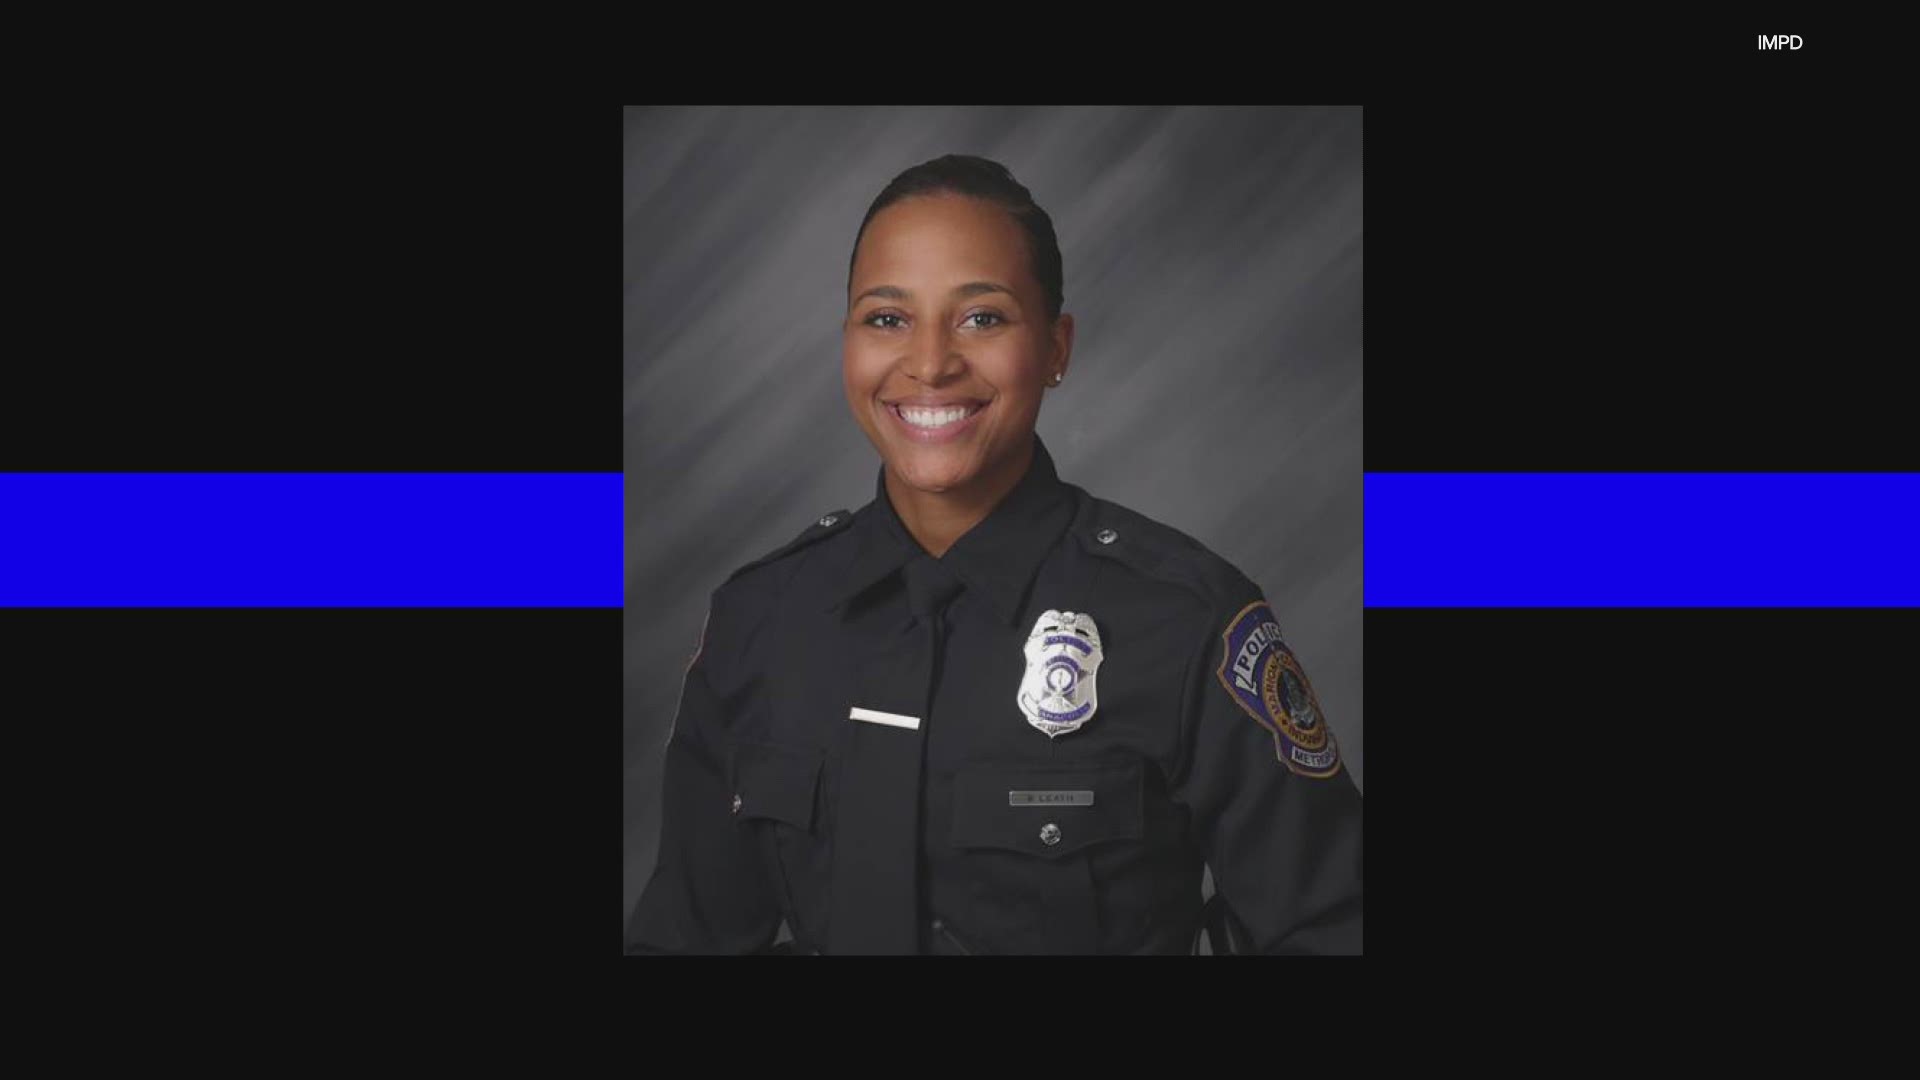 24-year-old Breann Leath was a mother, a military veteran and a well-respected Metro Police officer.